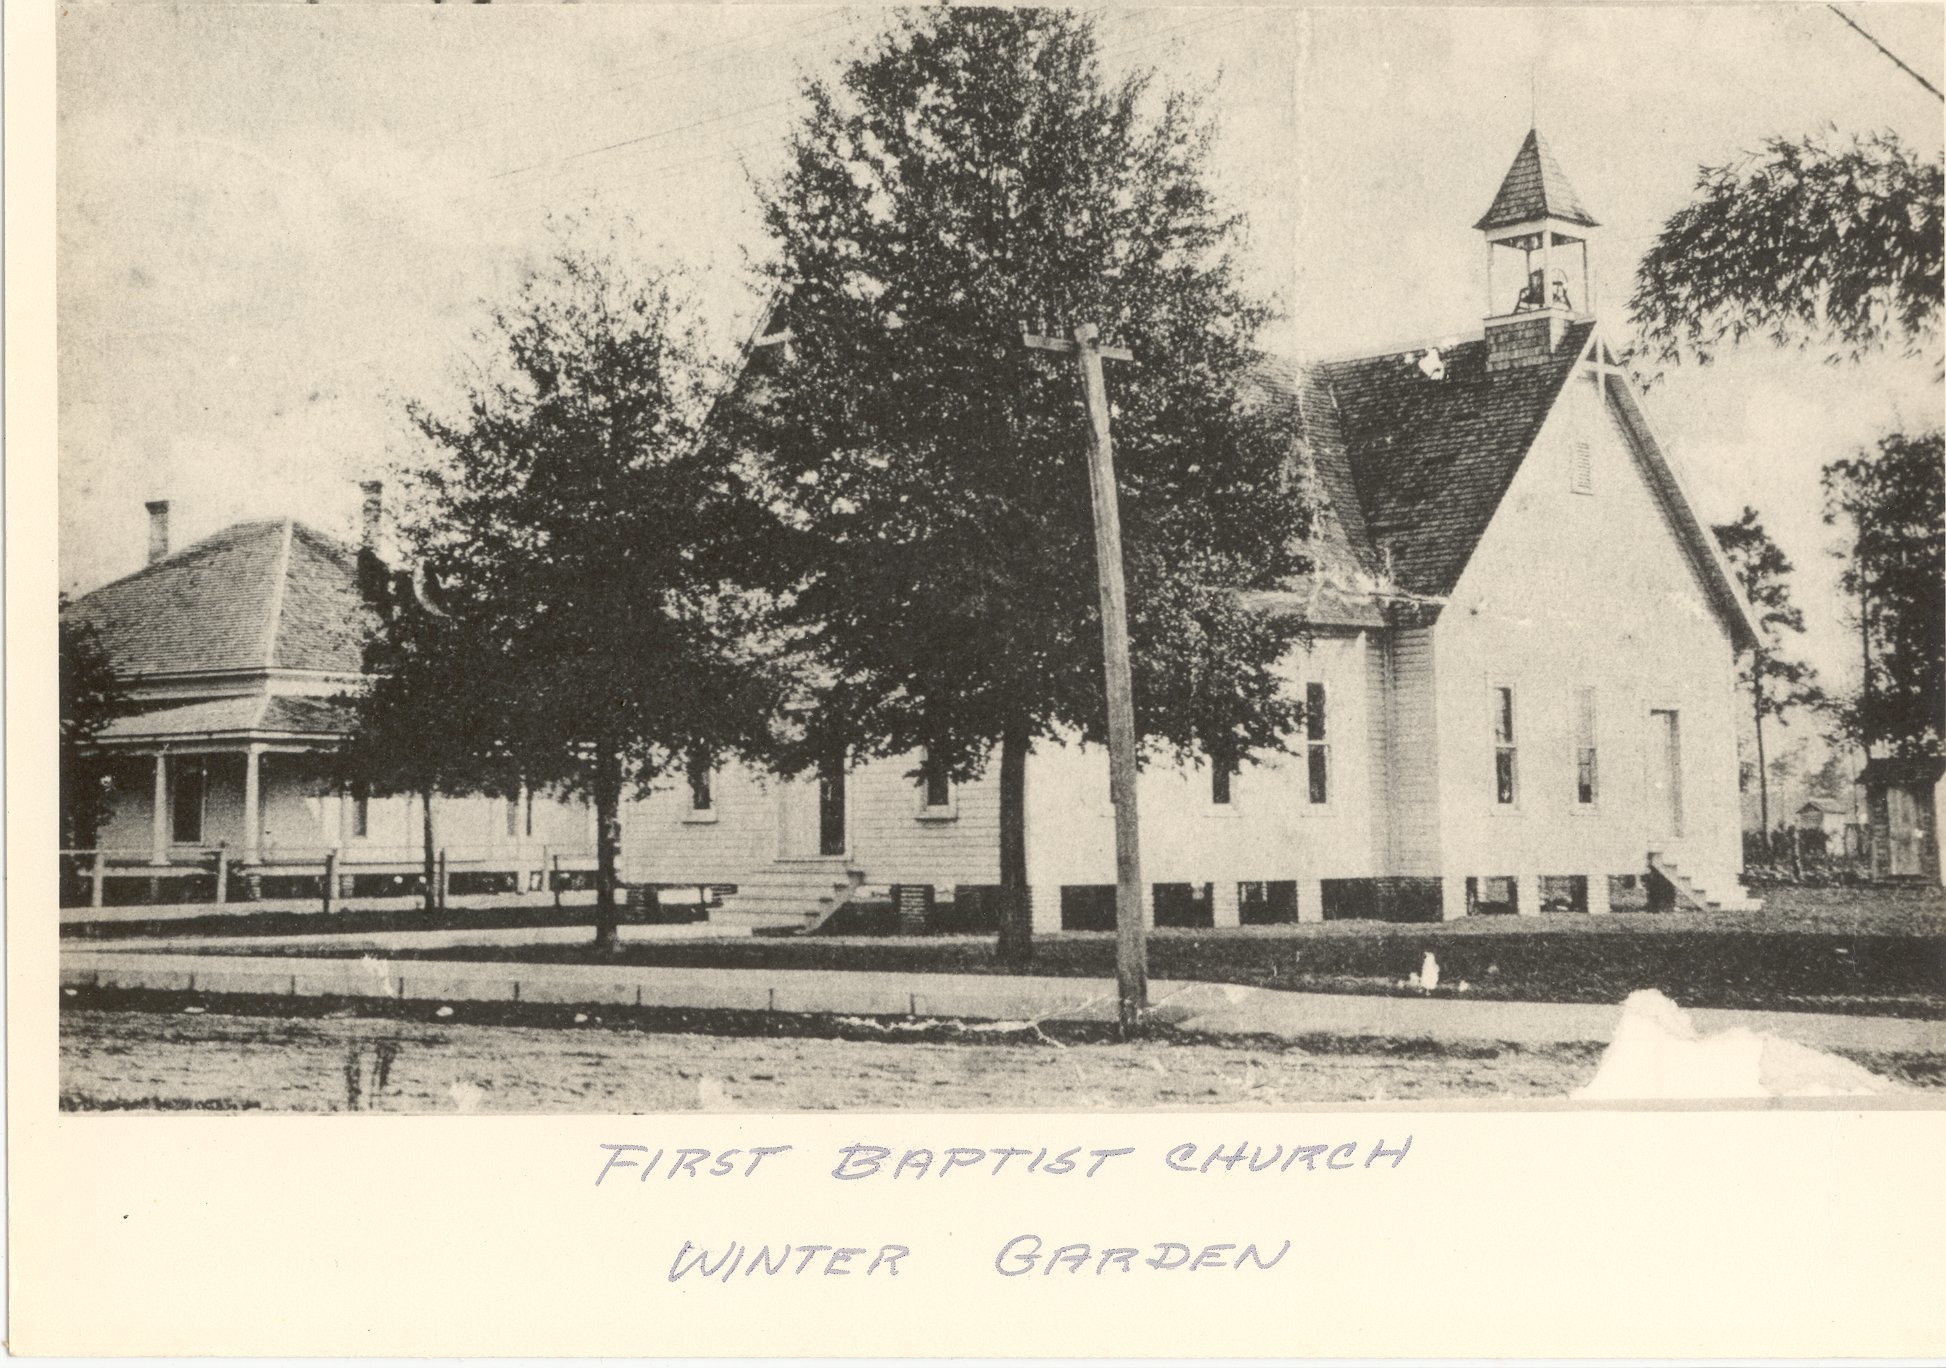 First Baptist Church, Winter Garden, originally organized in Ocoee in 1888 but moved to Winter Garden in 1896 — across the street from the current location. By the early 1900s, another building was constructed on the current site.